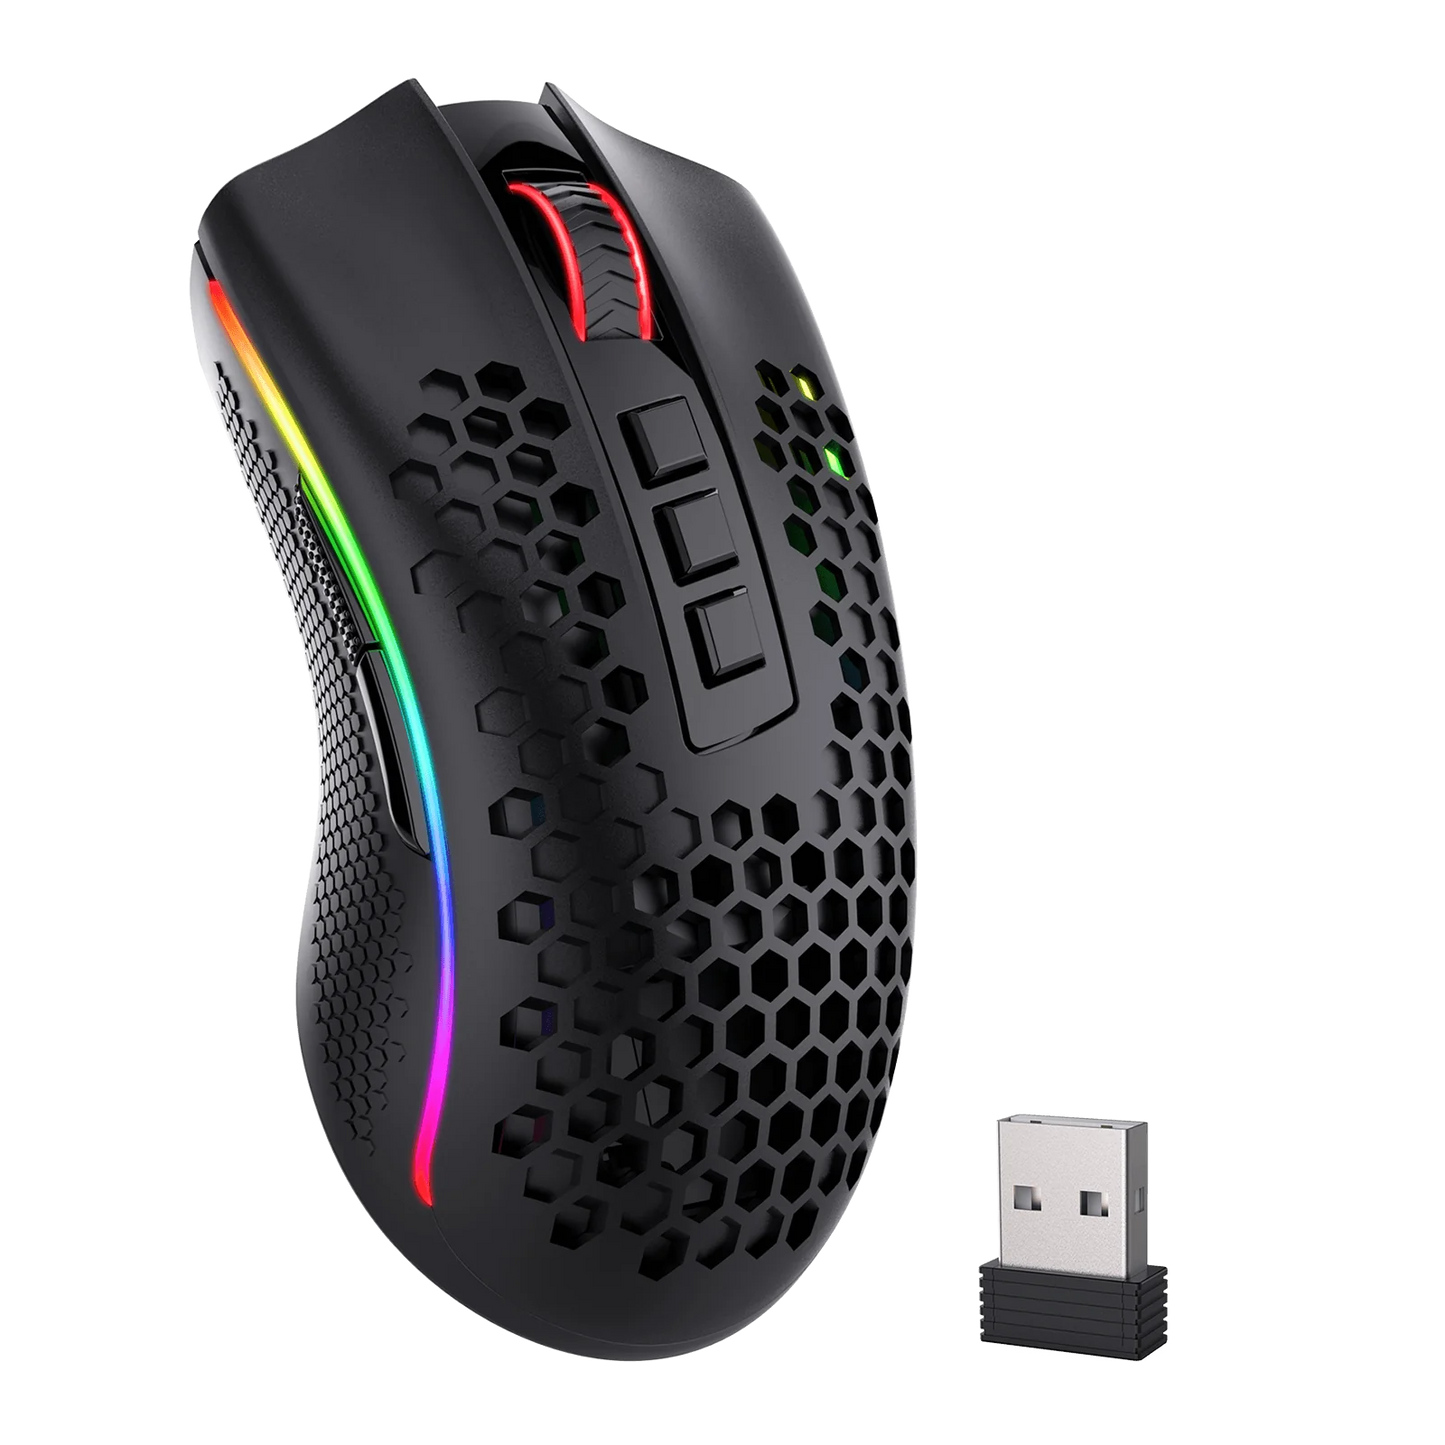 Redragon M808 Storm Pro Wireless Gaming Mouse